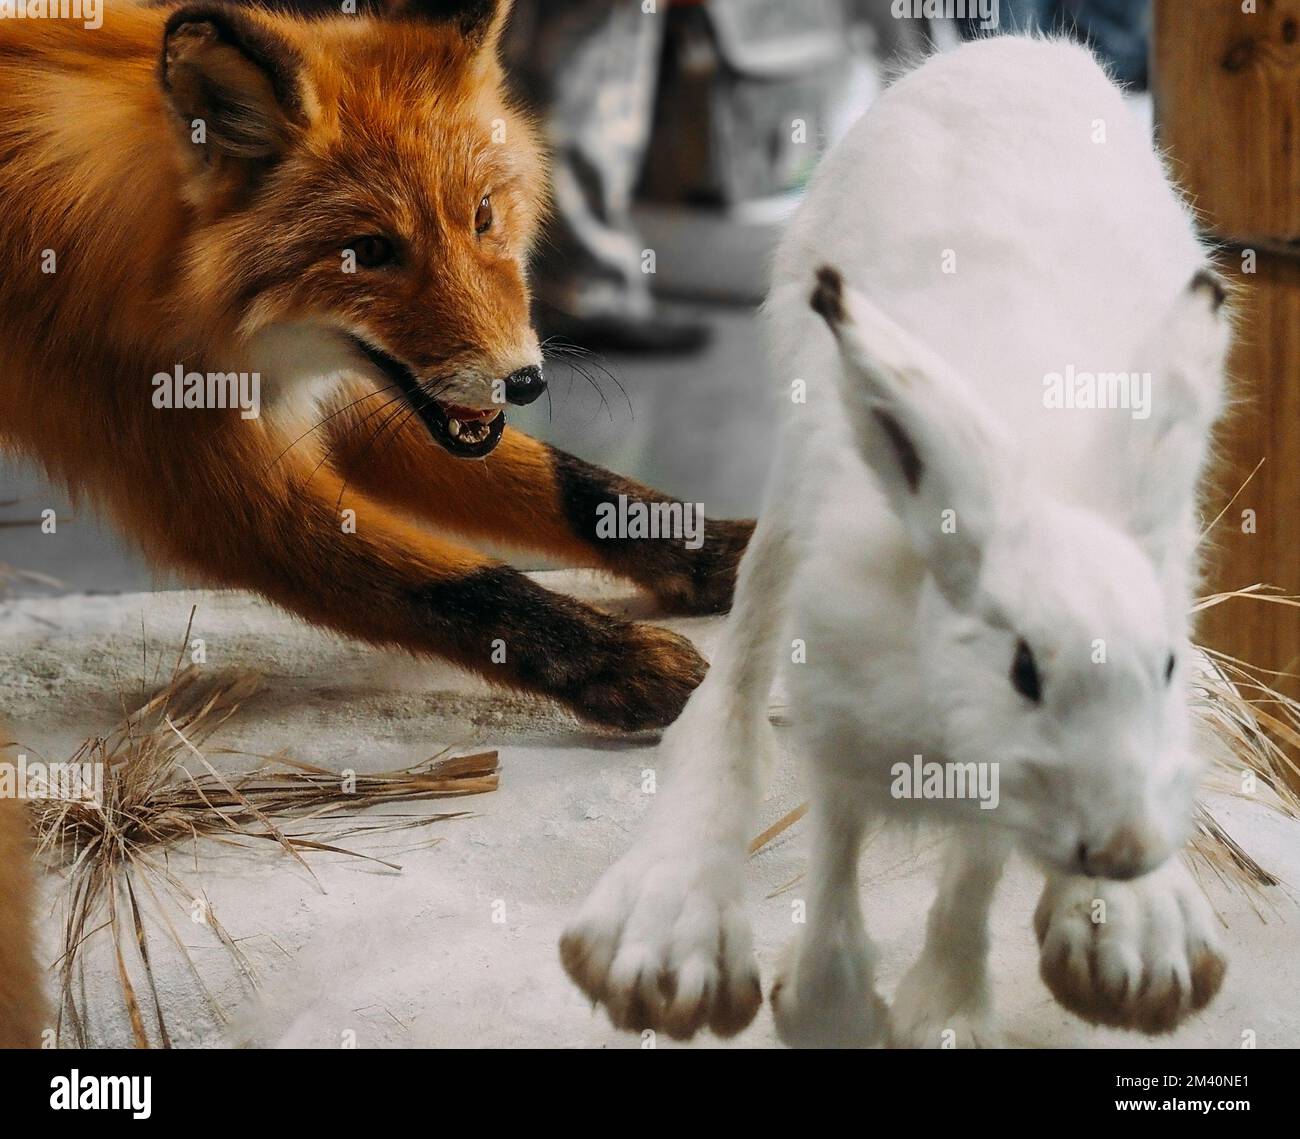 Red fox chasing white hare. Installation or imitation of predator chase. Stuffed animals killed.. Stock Photo